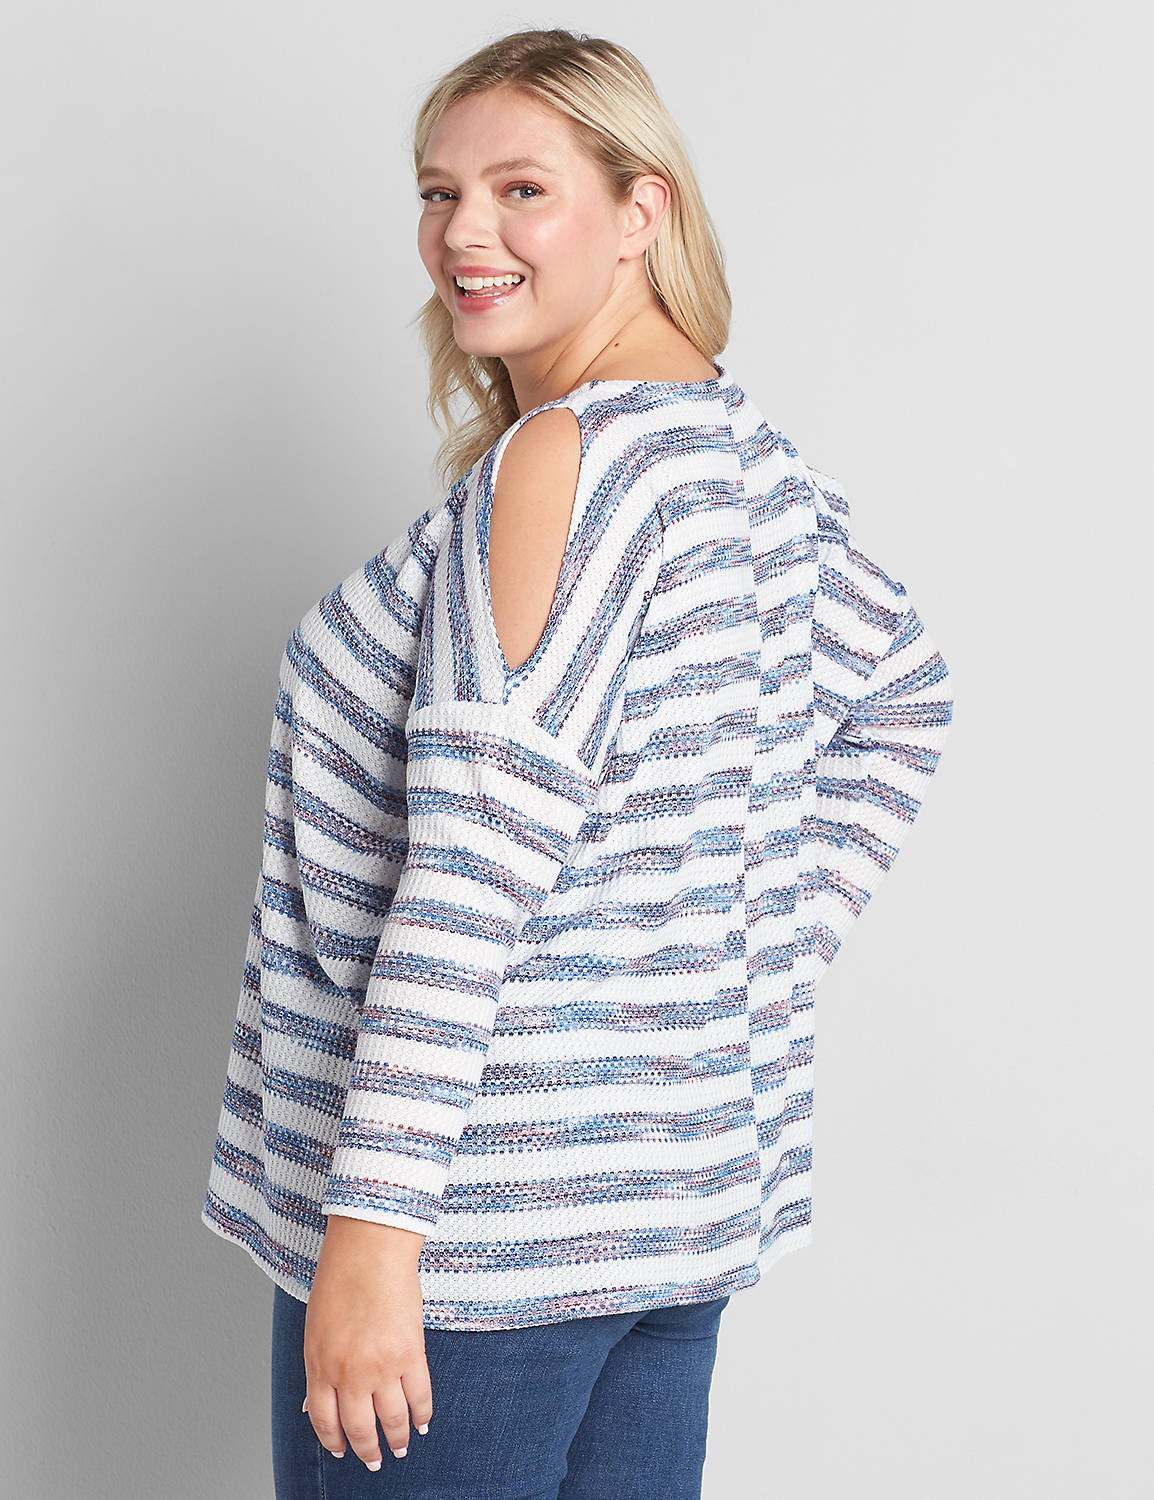 Long Sleeve Open Crew Neck With Cutout Shoulders In Space Dye Stripe:Stripe:10/12 Product Image 2